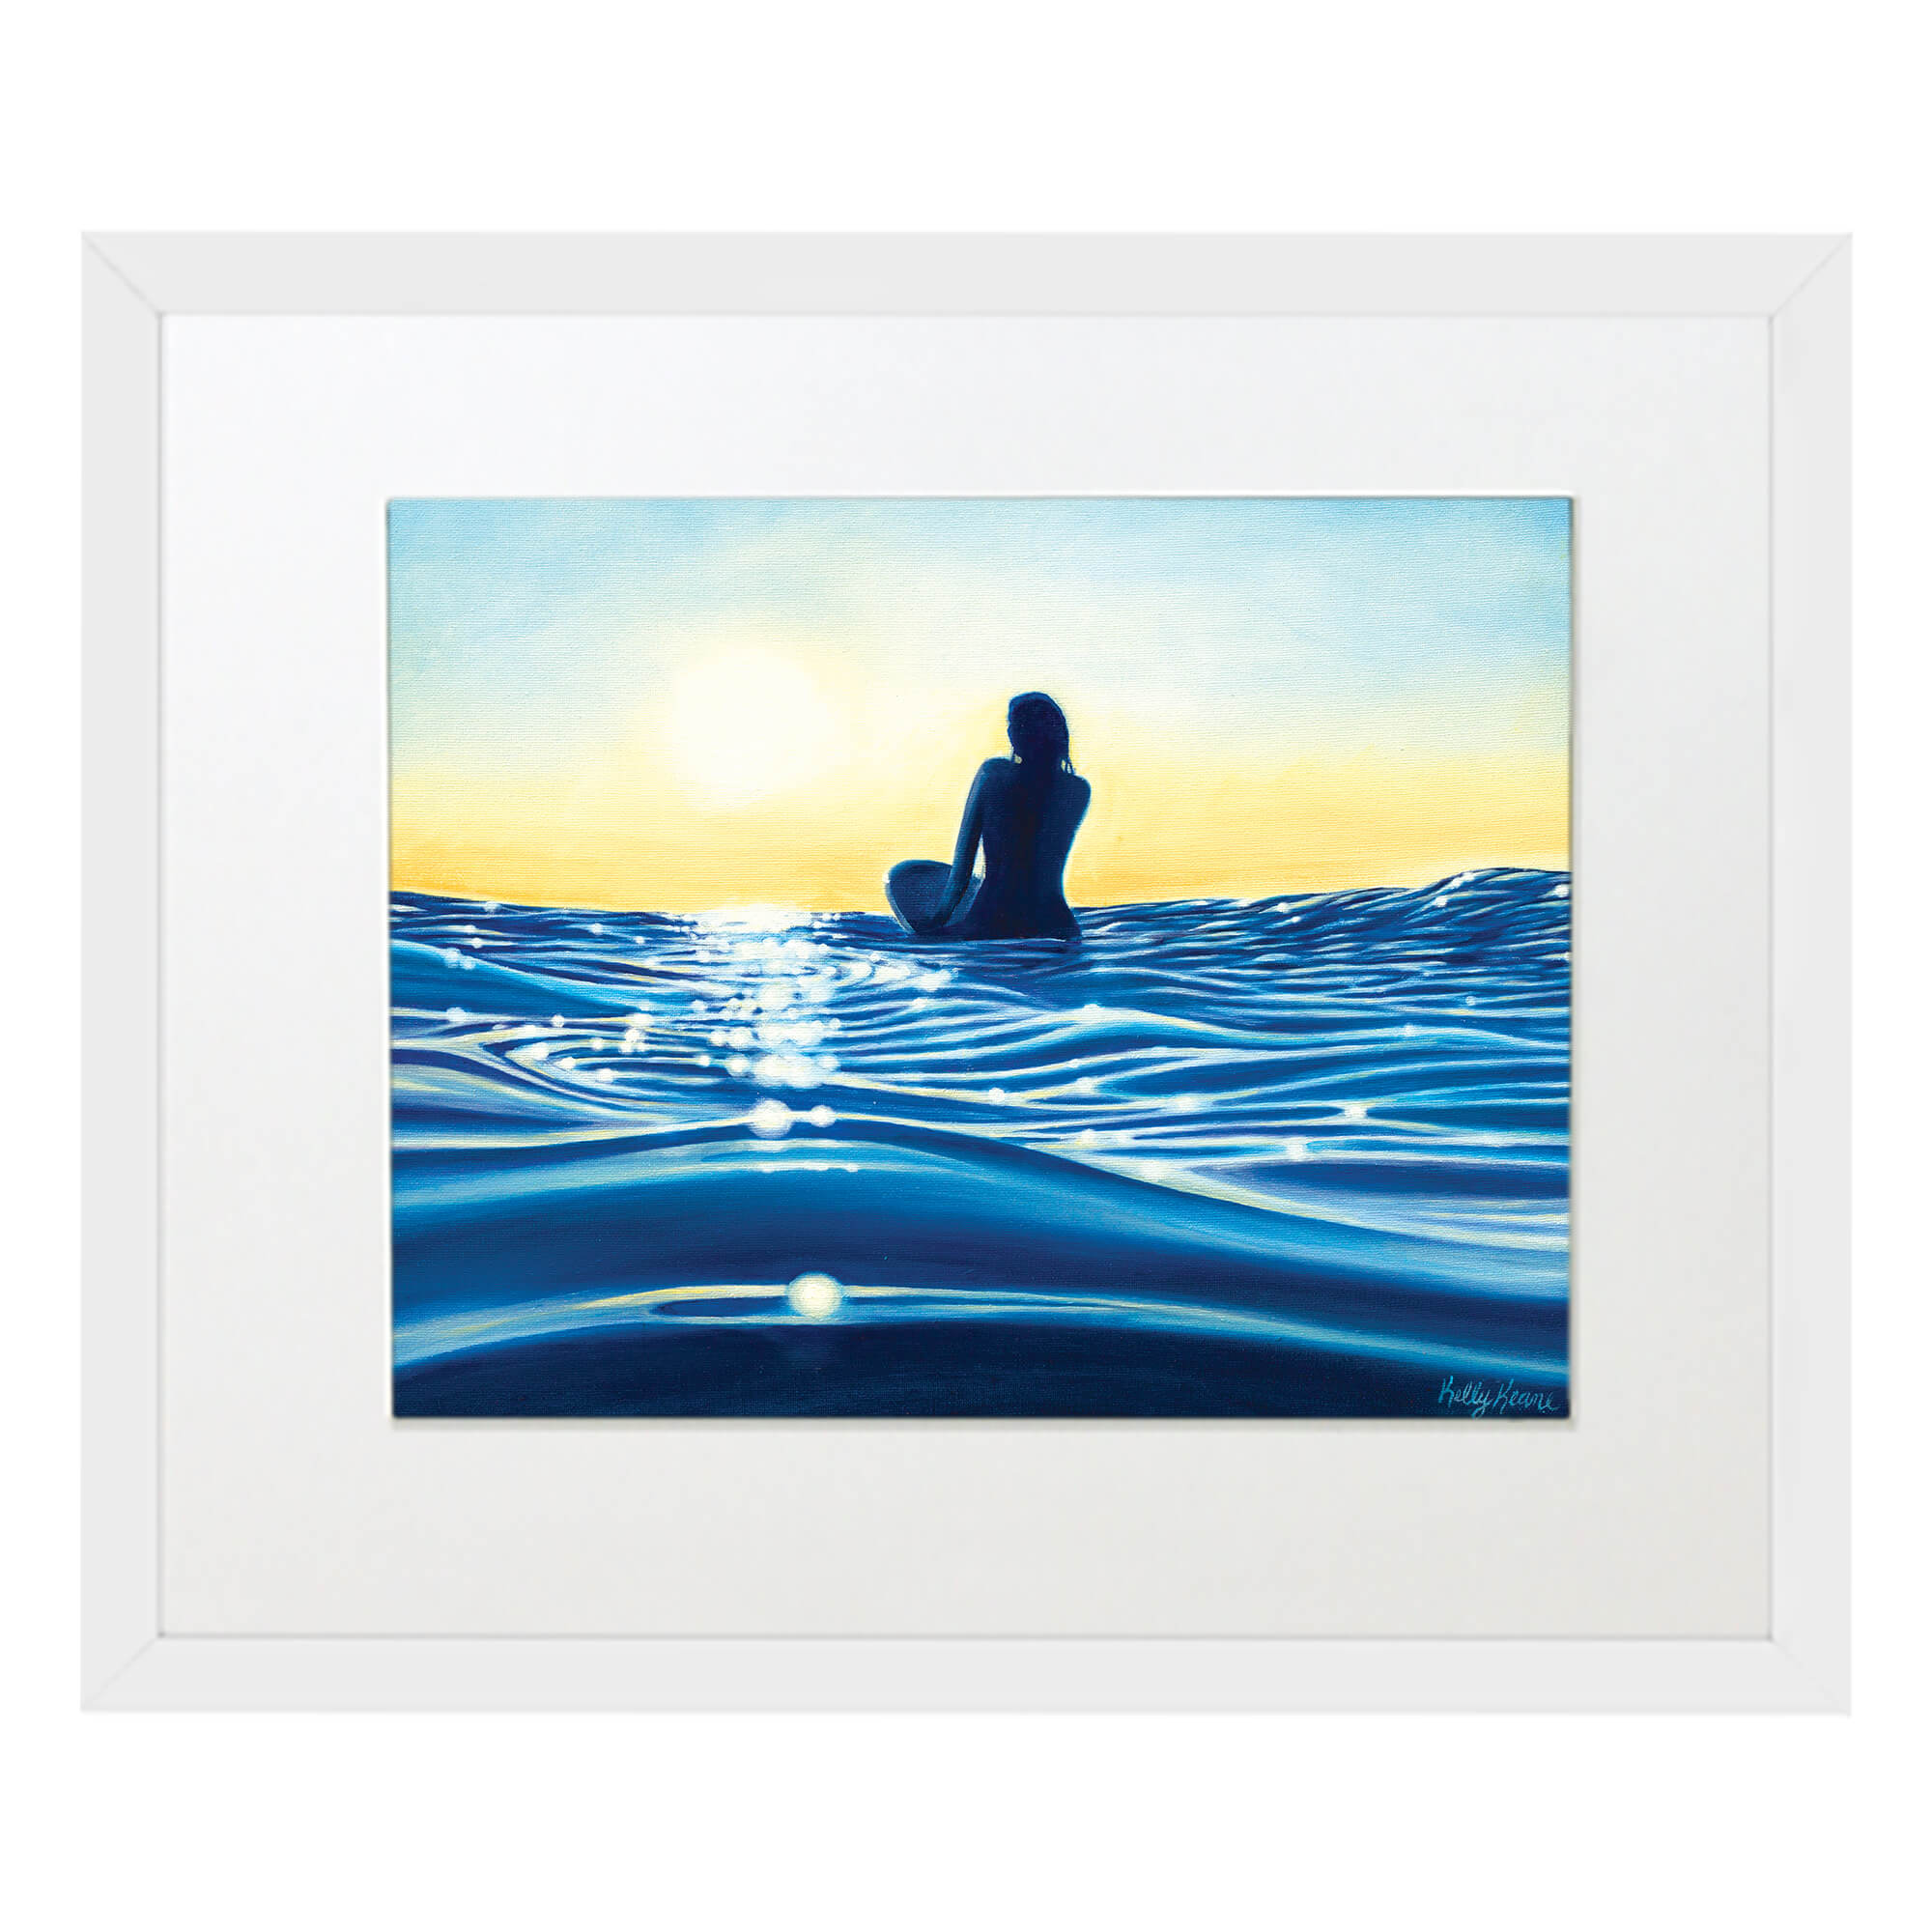 Matted art print with white frame featuring a woman surfing on the blue sea by hawaii artist Kelly Keane 